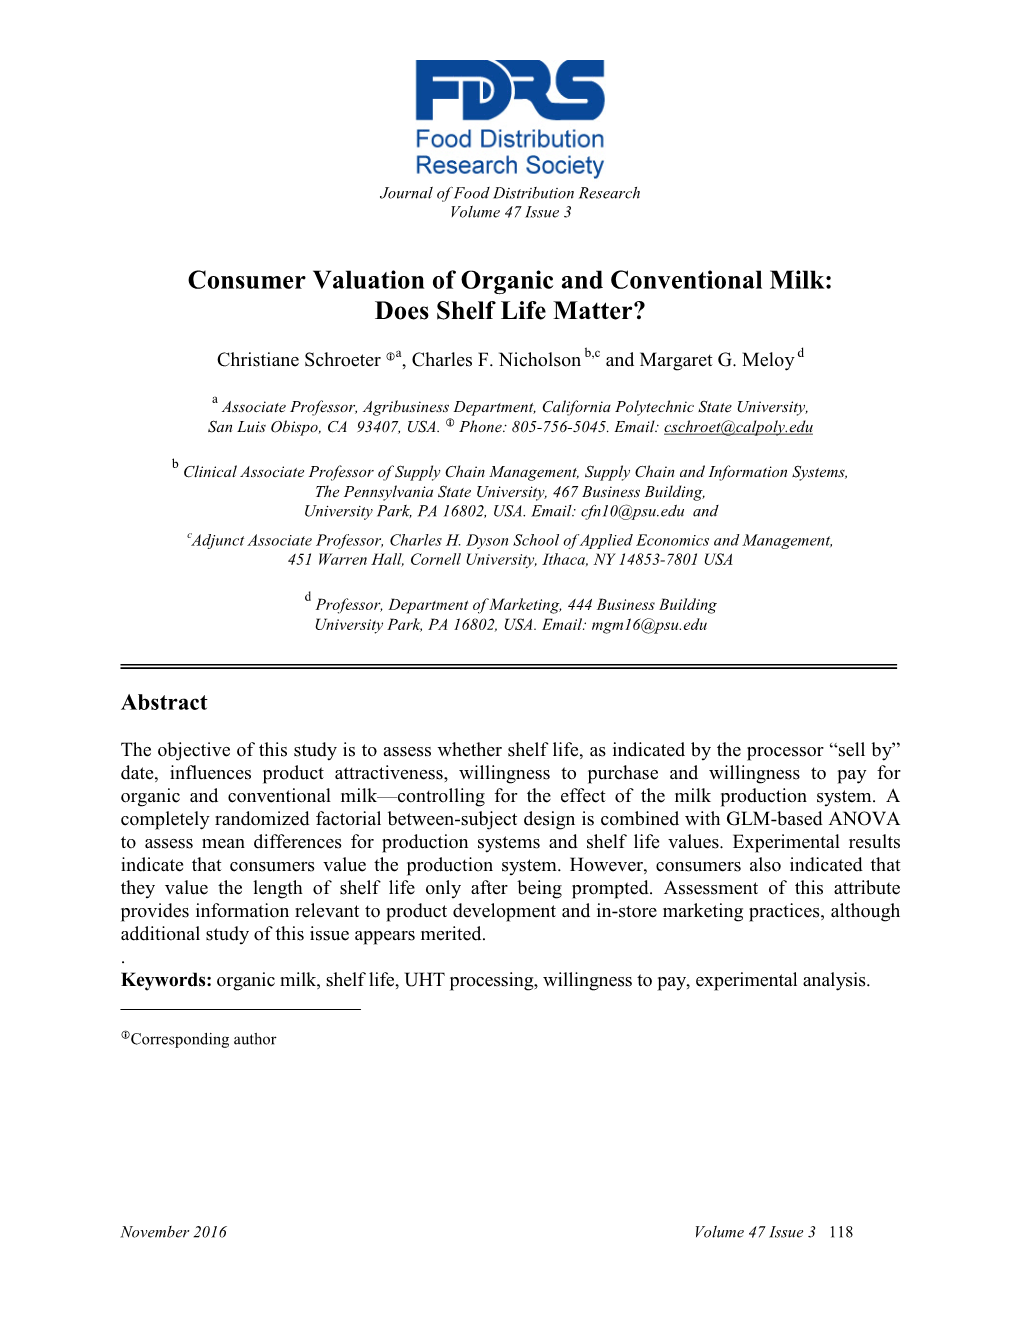 Consumer Valuation of Organic and Conventional Milk: Does Shelf Life Matter?